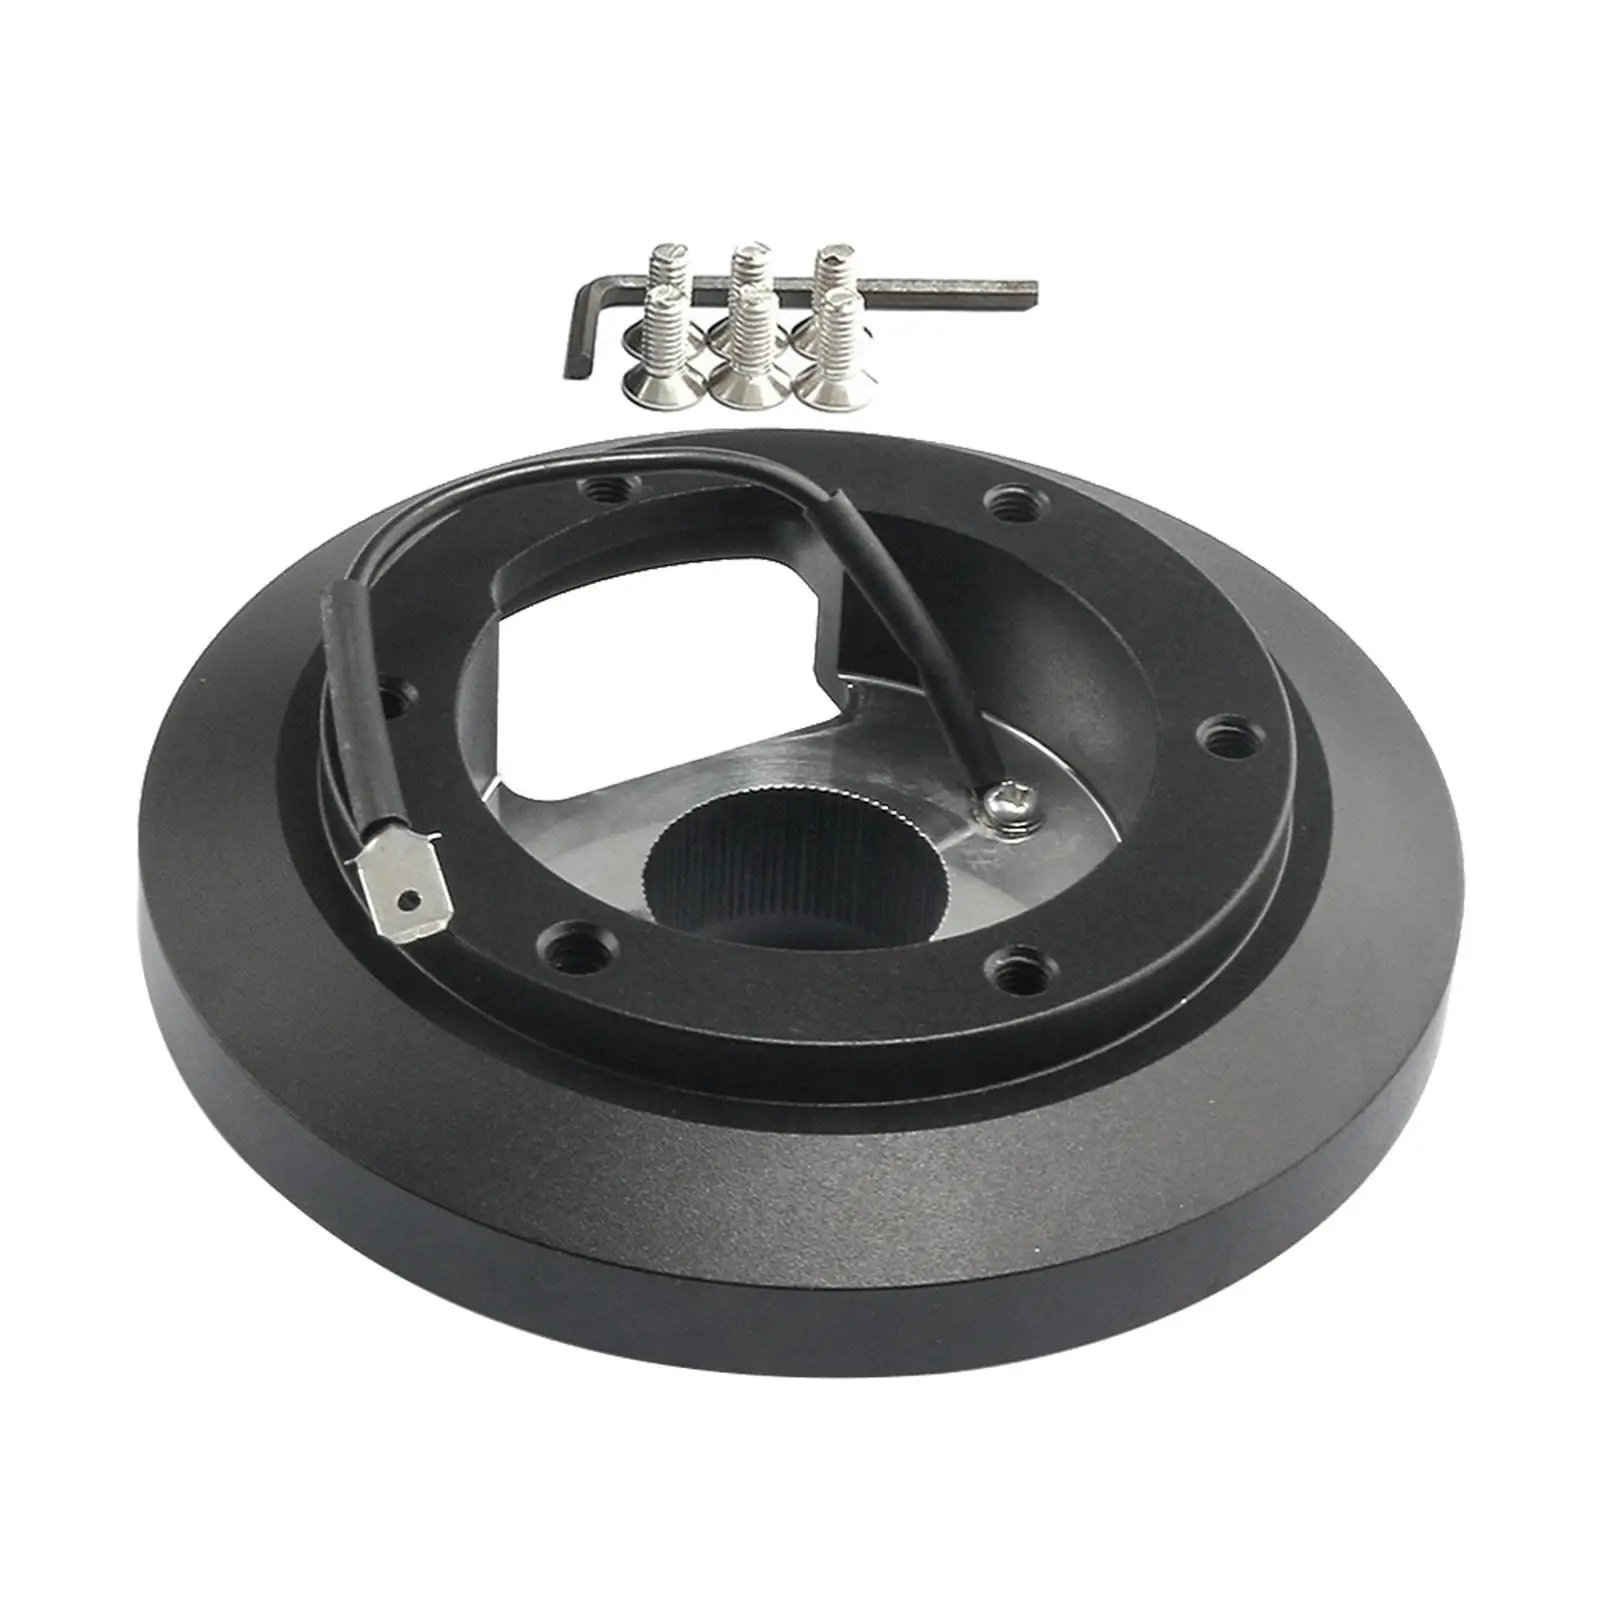 Steering Wheel Hub Adapter Kit Accessories Fit for Audi A3 A4 A6 A8 180H